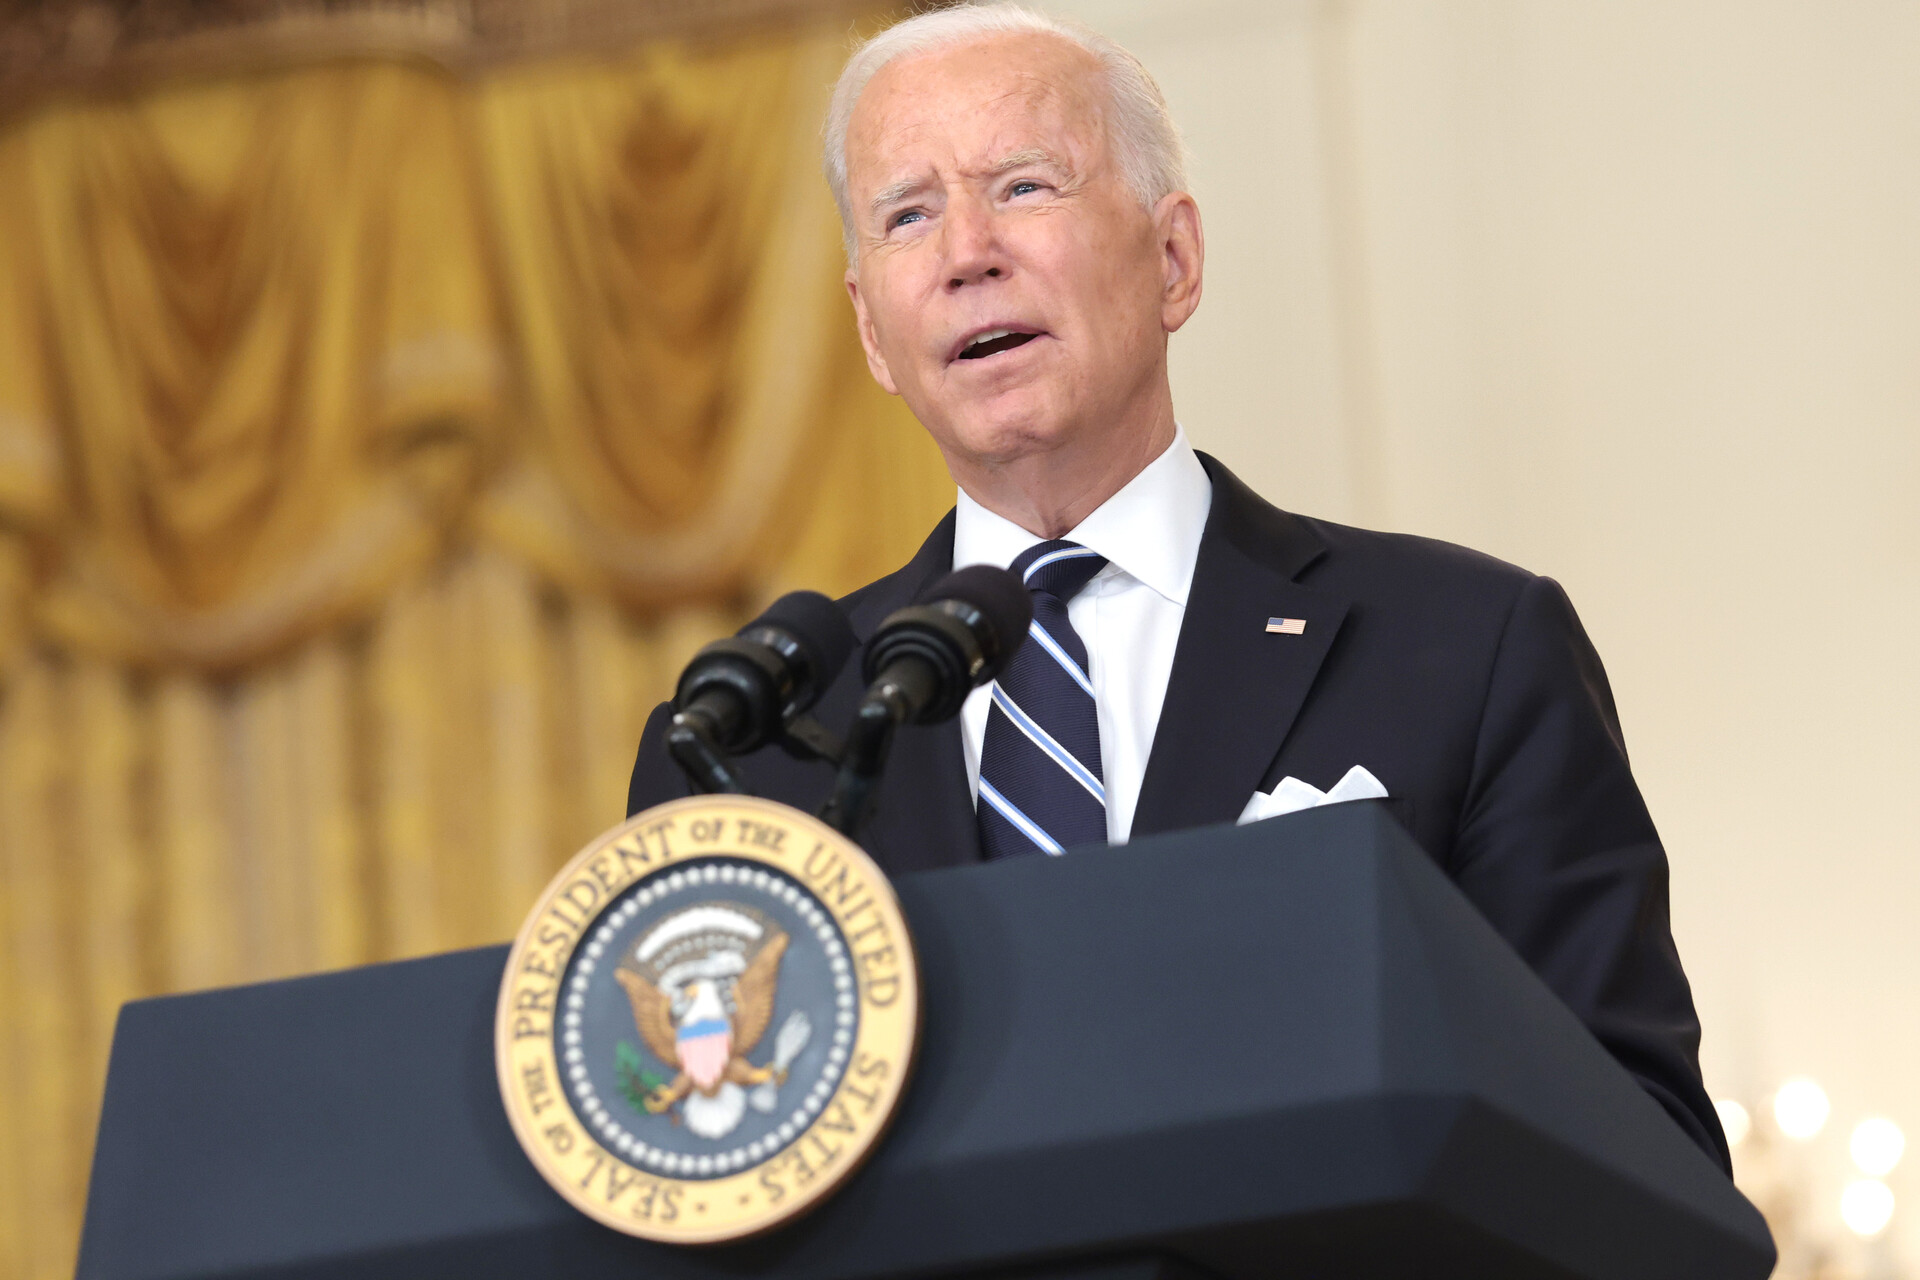 President Joe Biden speaks from the presidential podium inside the White House. He has short, gray hair, and wears a navy suit and tie. The presidential seal is in gold in the center of the podium and gold curtains are seen in the background.